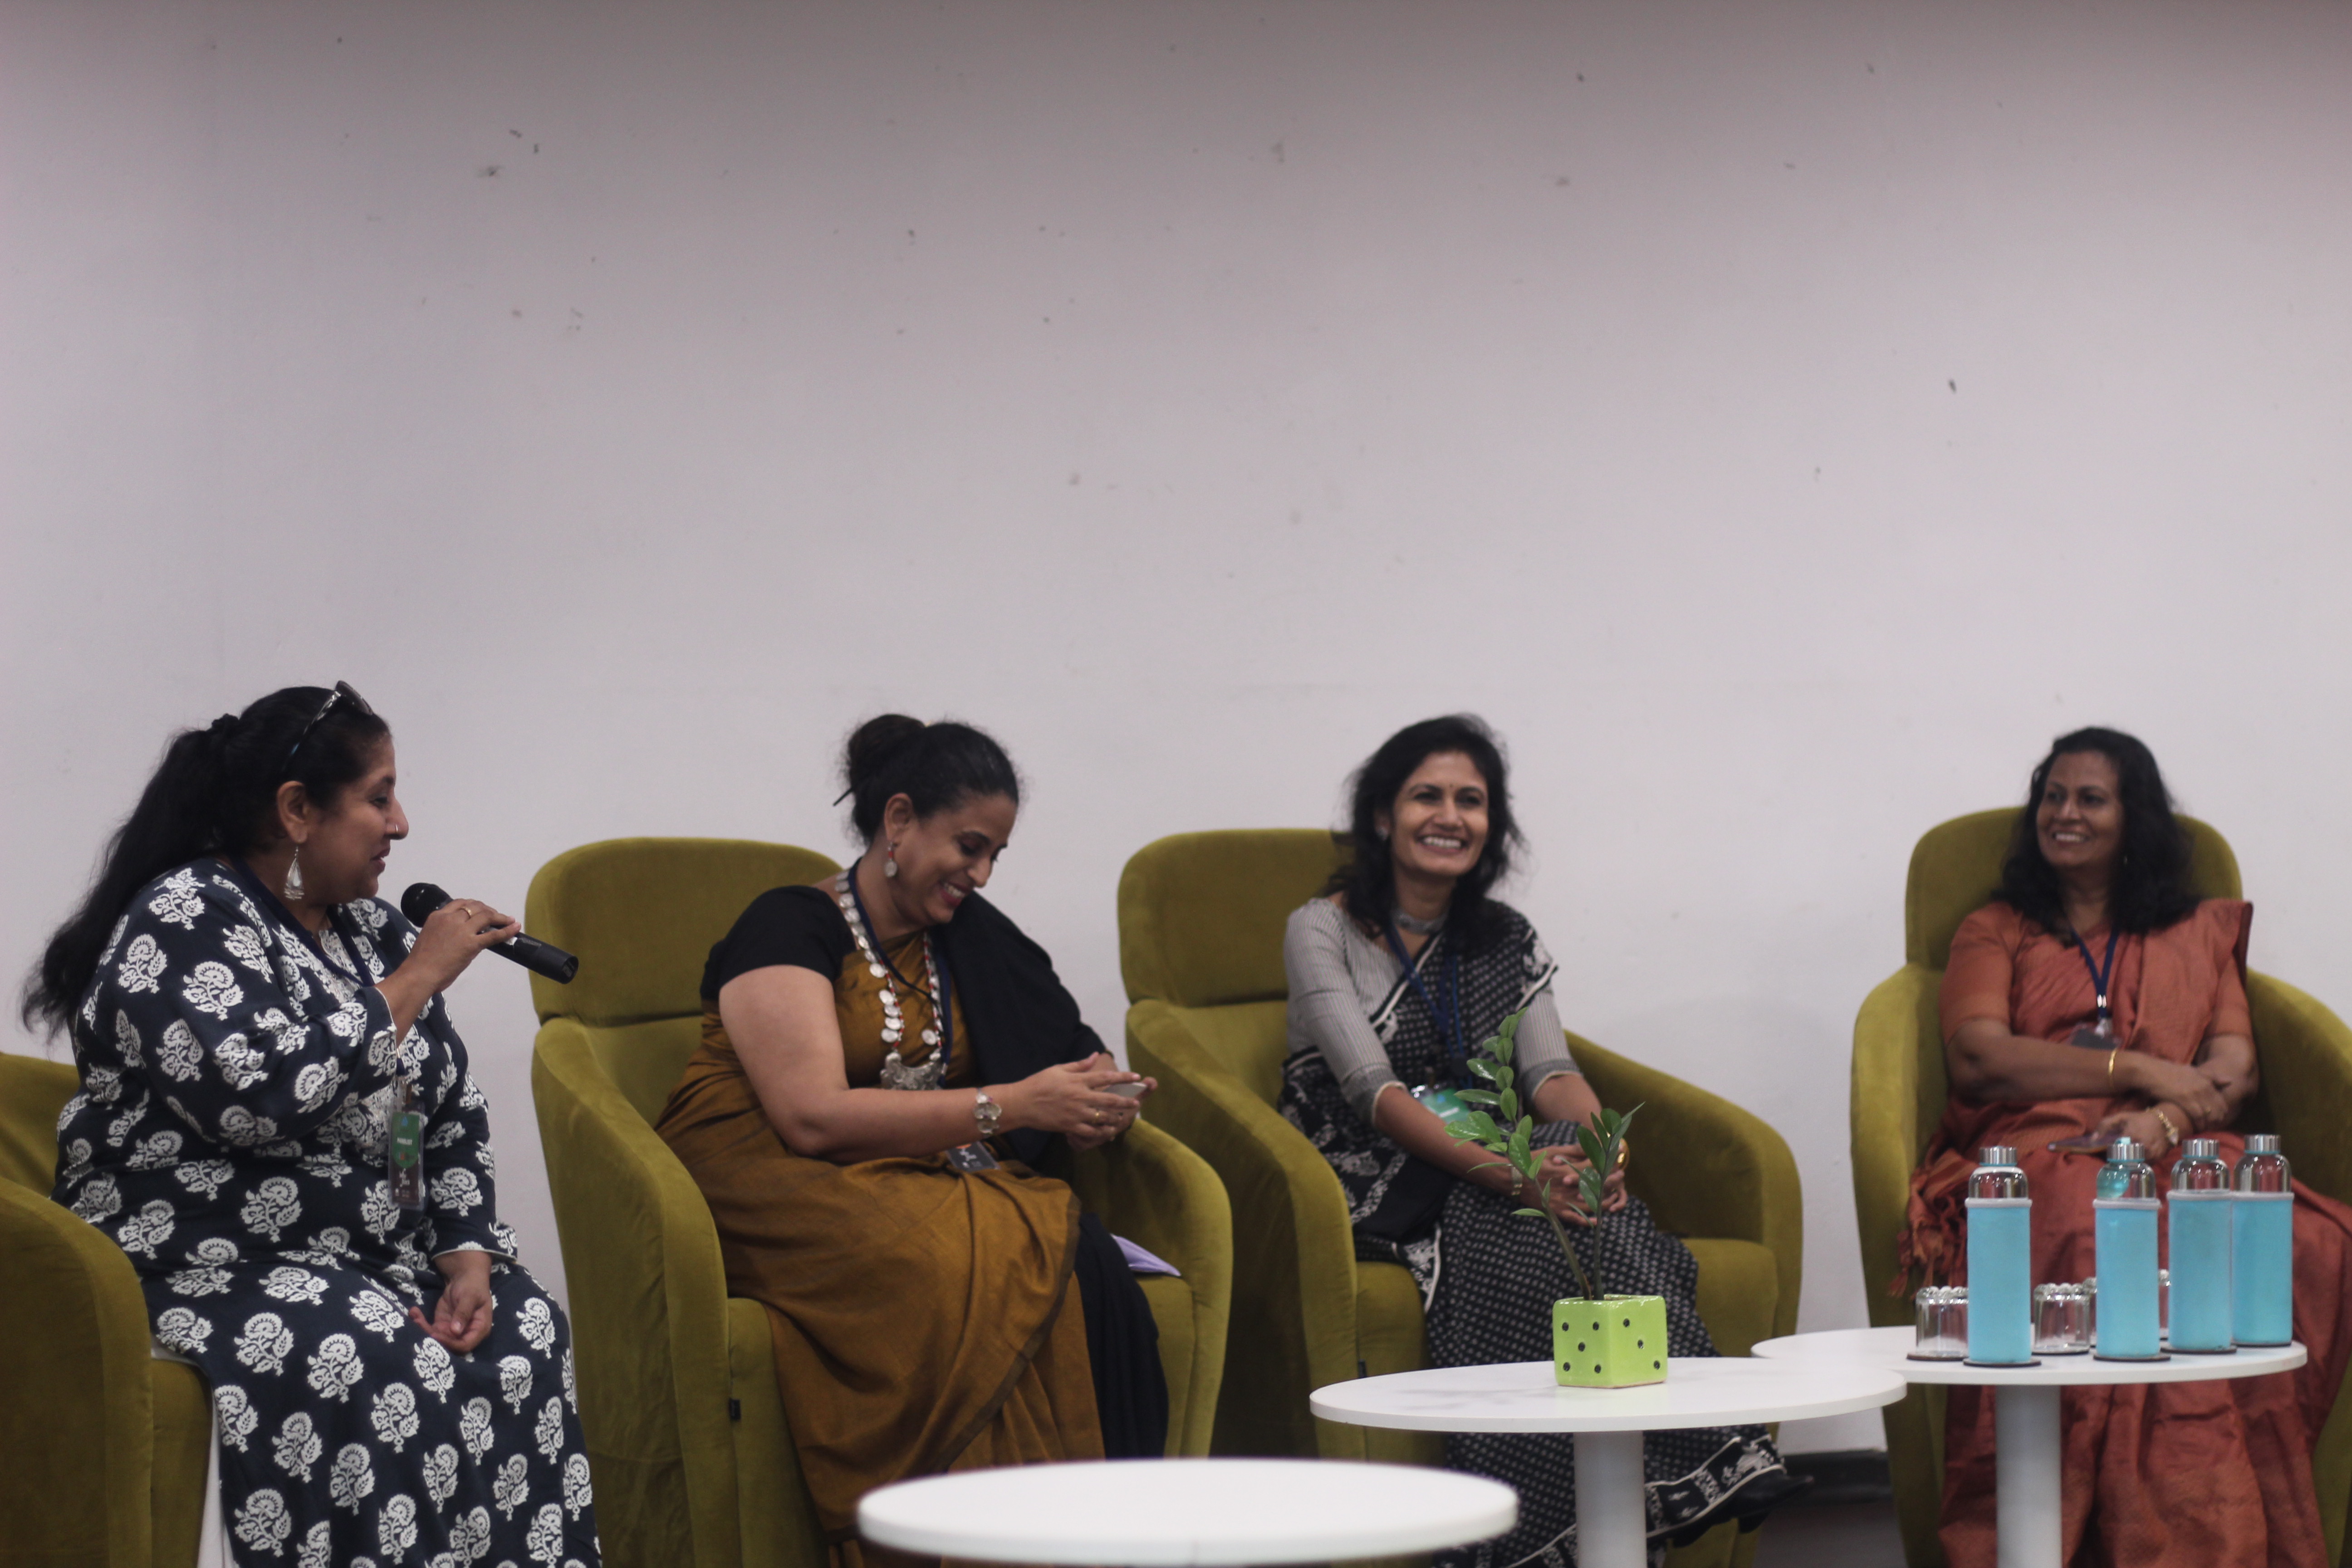 An Image of the Panel Discussion